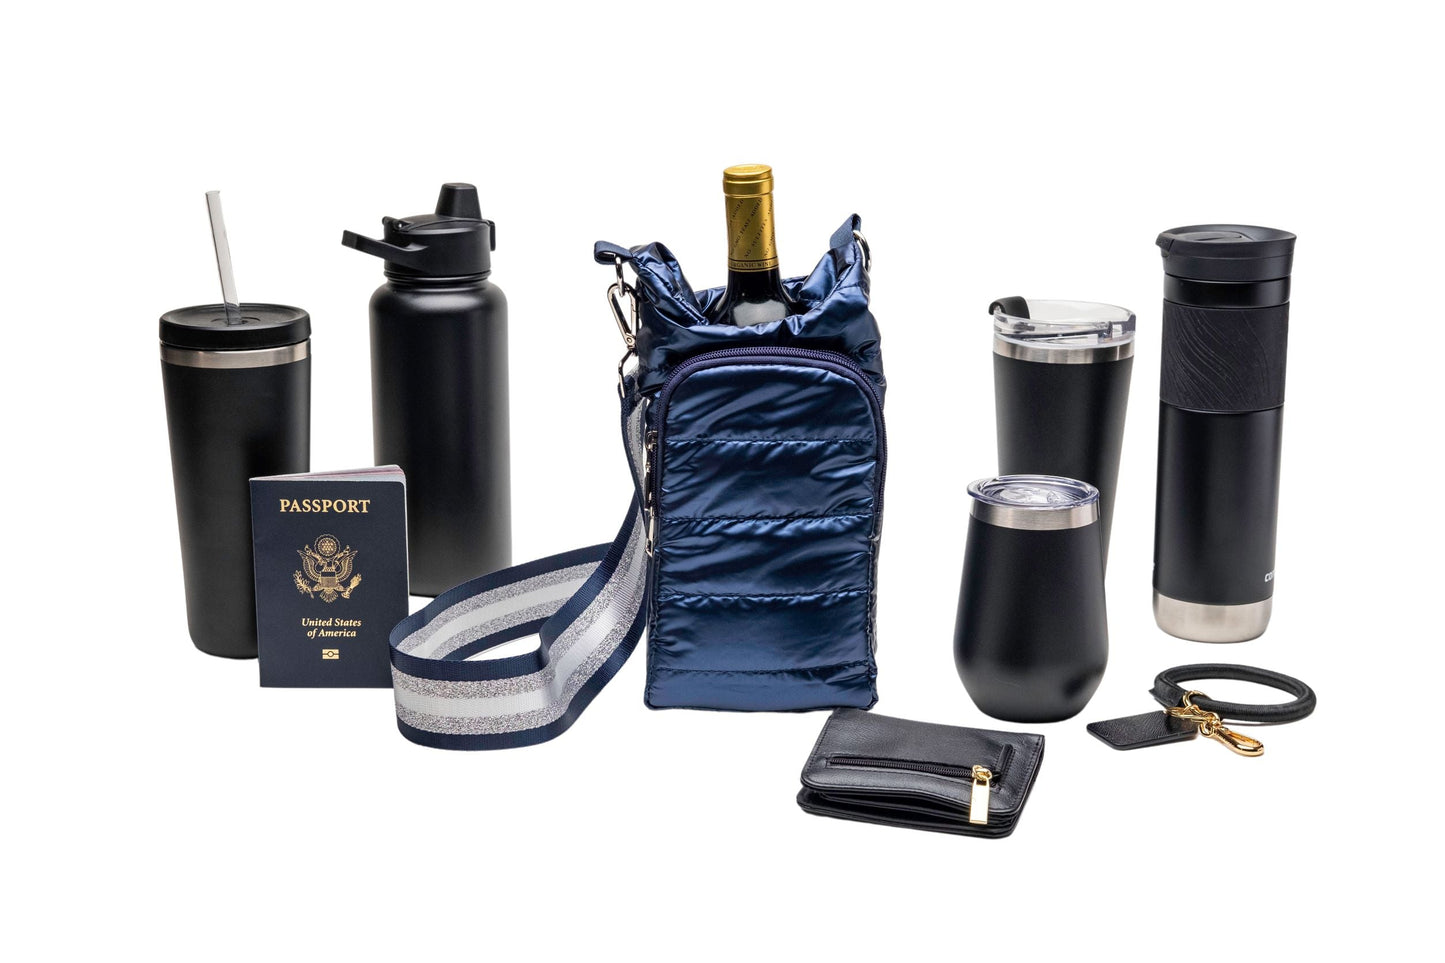 Wholesale Packs (2, 6, or 10) - Navy Blue Shiny HydroBag with Navy/Silver/White Strap